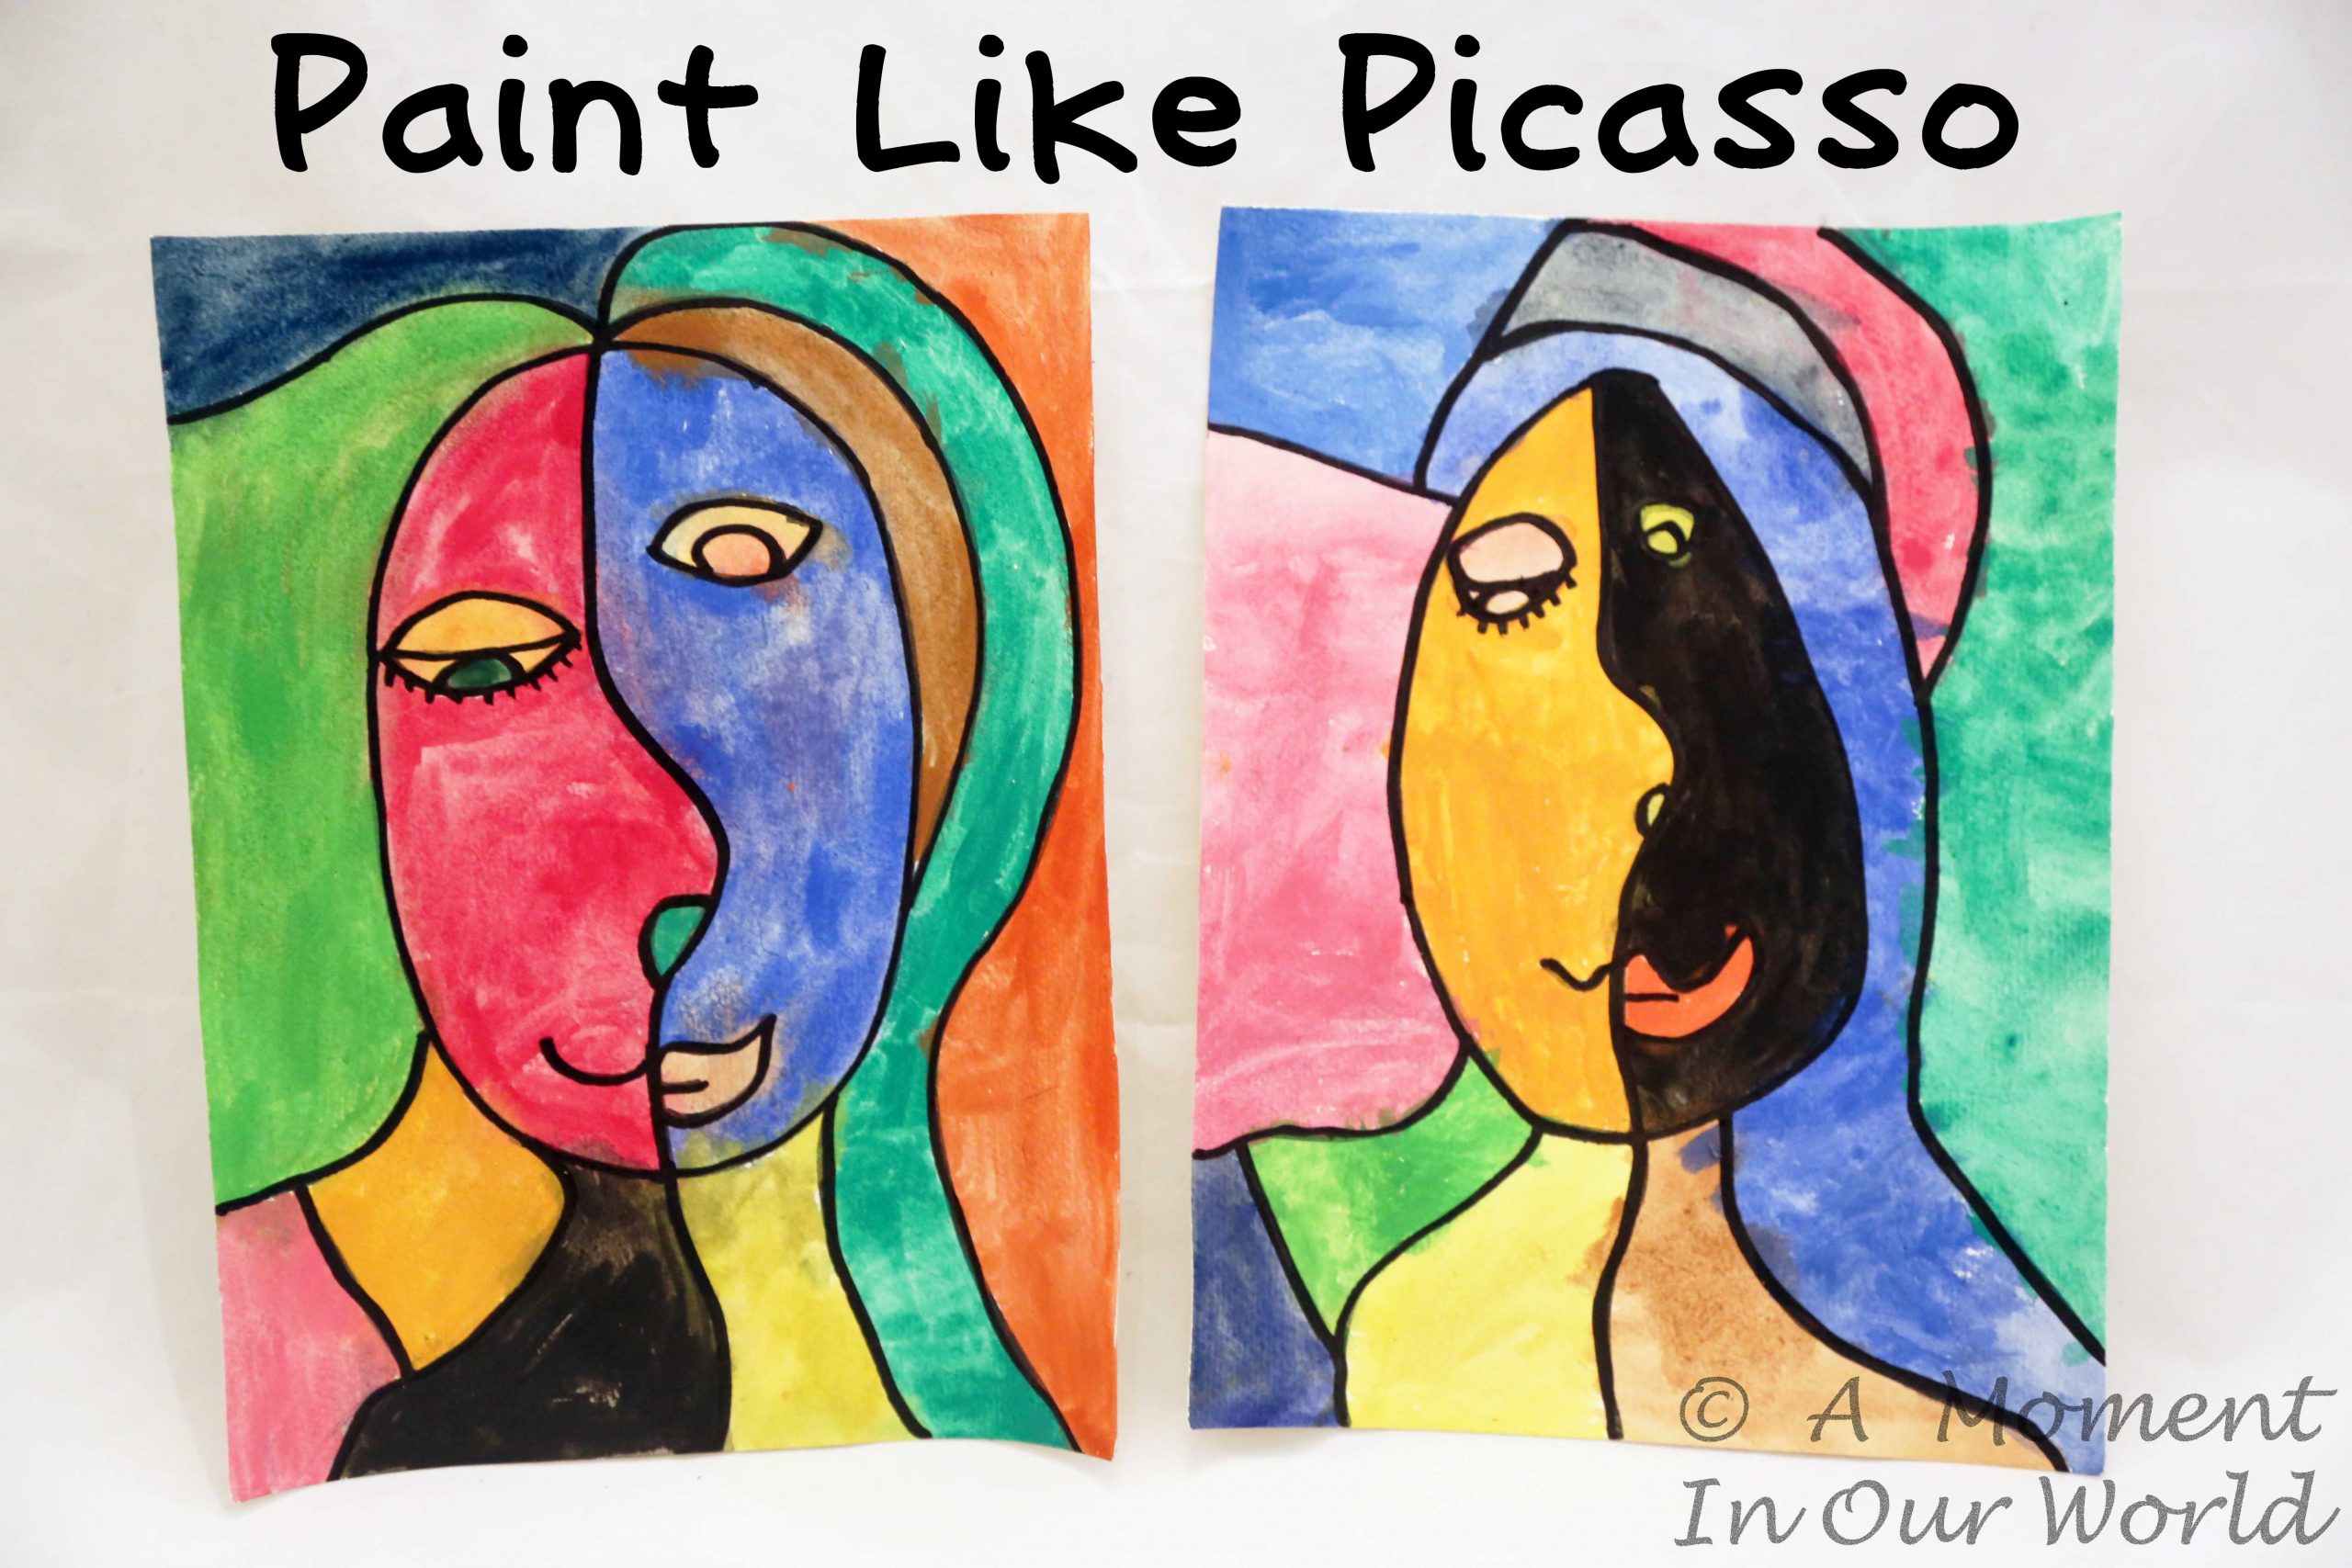 Paint Like Picasso